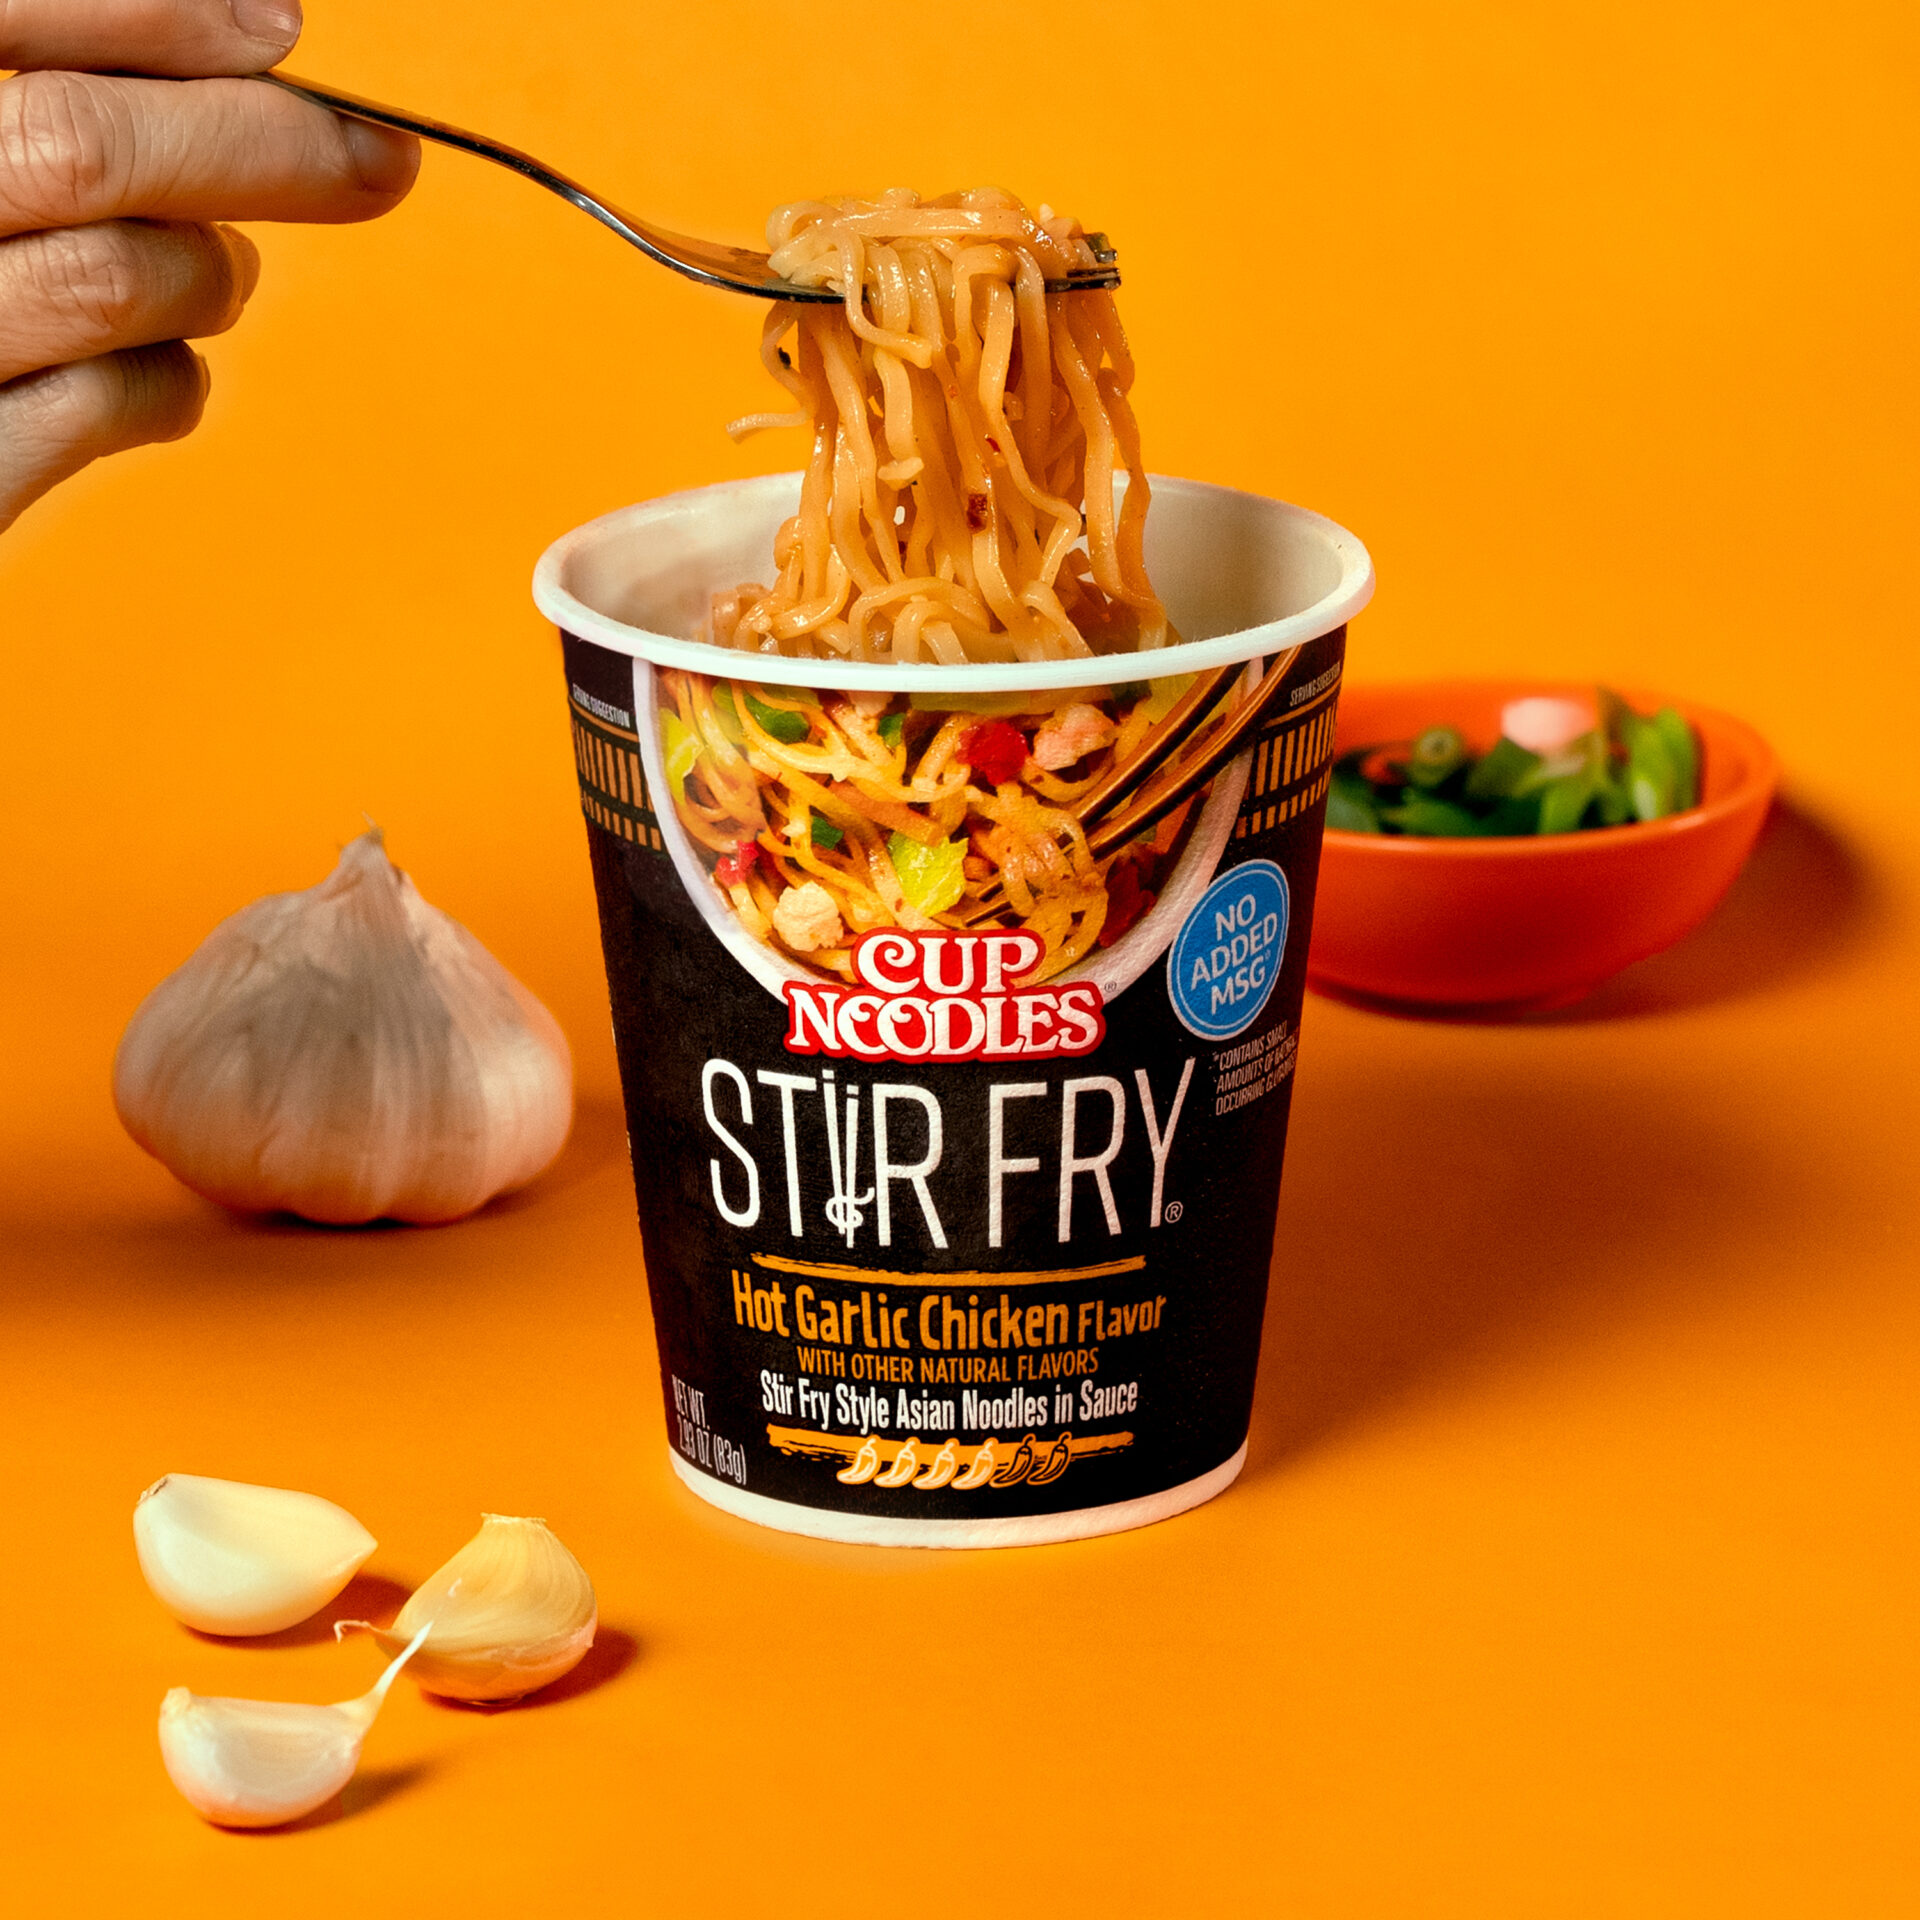 https://www.nissinfoods.com/wp-content/uploads/2023/03/23_NISSIN_Content_Product_CN_SF_HotGarlicChicken_SM_X1_0111_retouched_R2V1_3000x3000.jpg